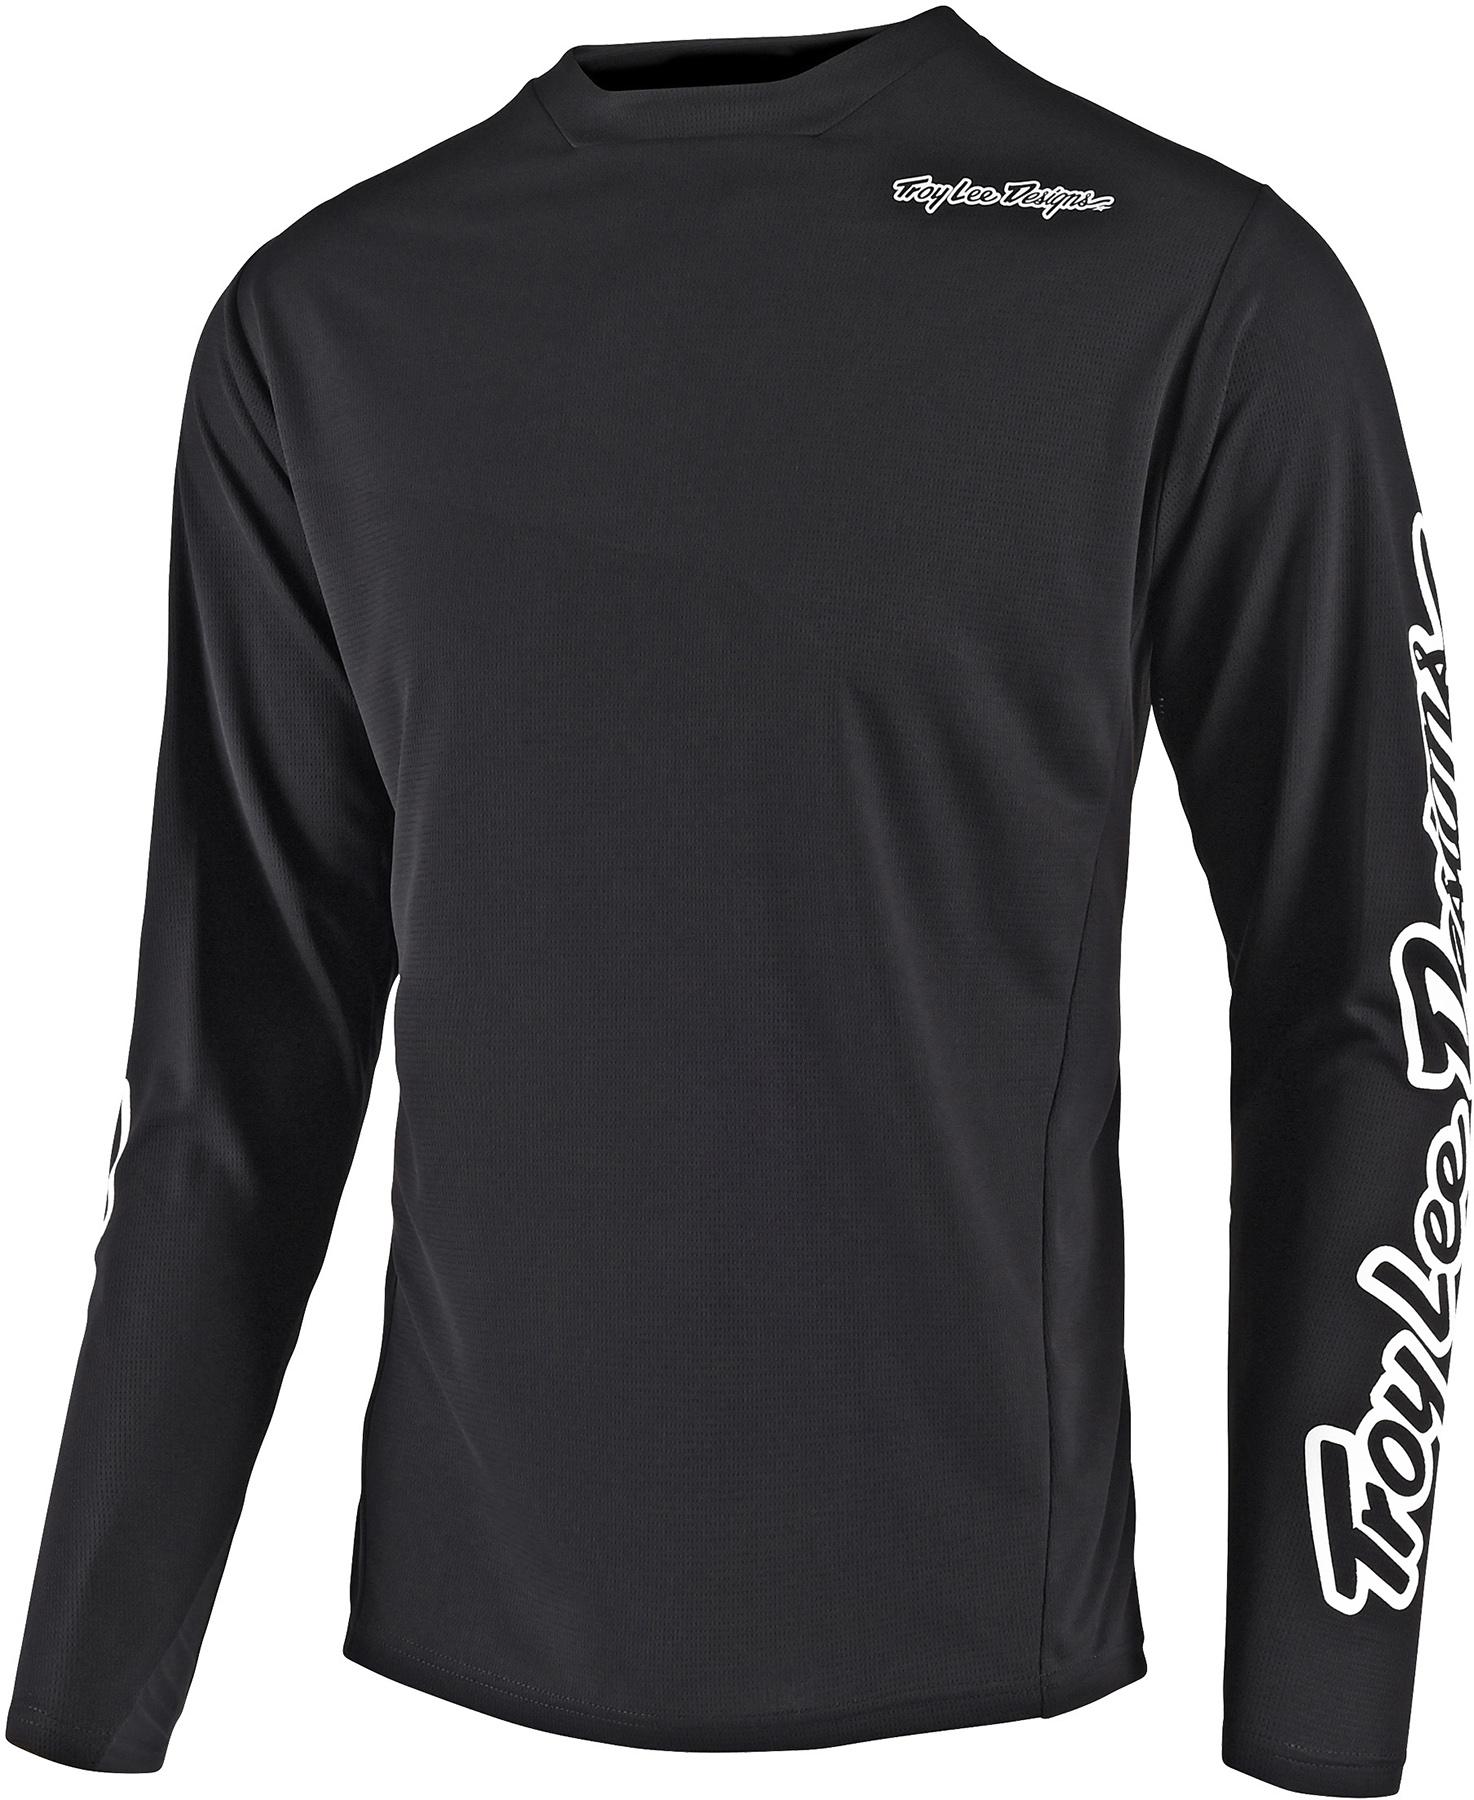 Troy Lee Designs Sprint Cycling Jersey - Black